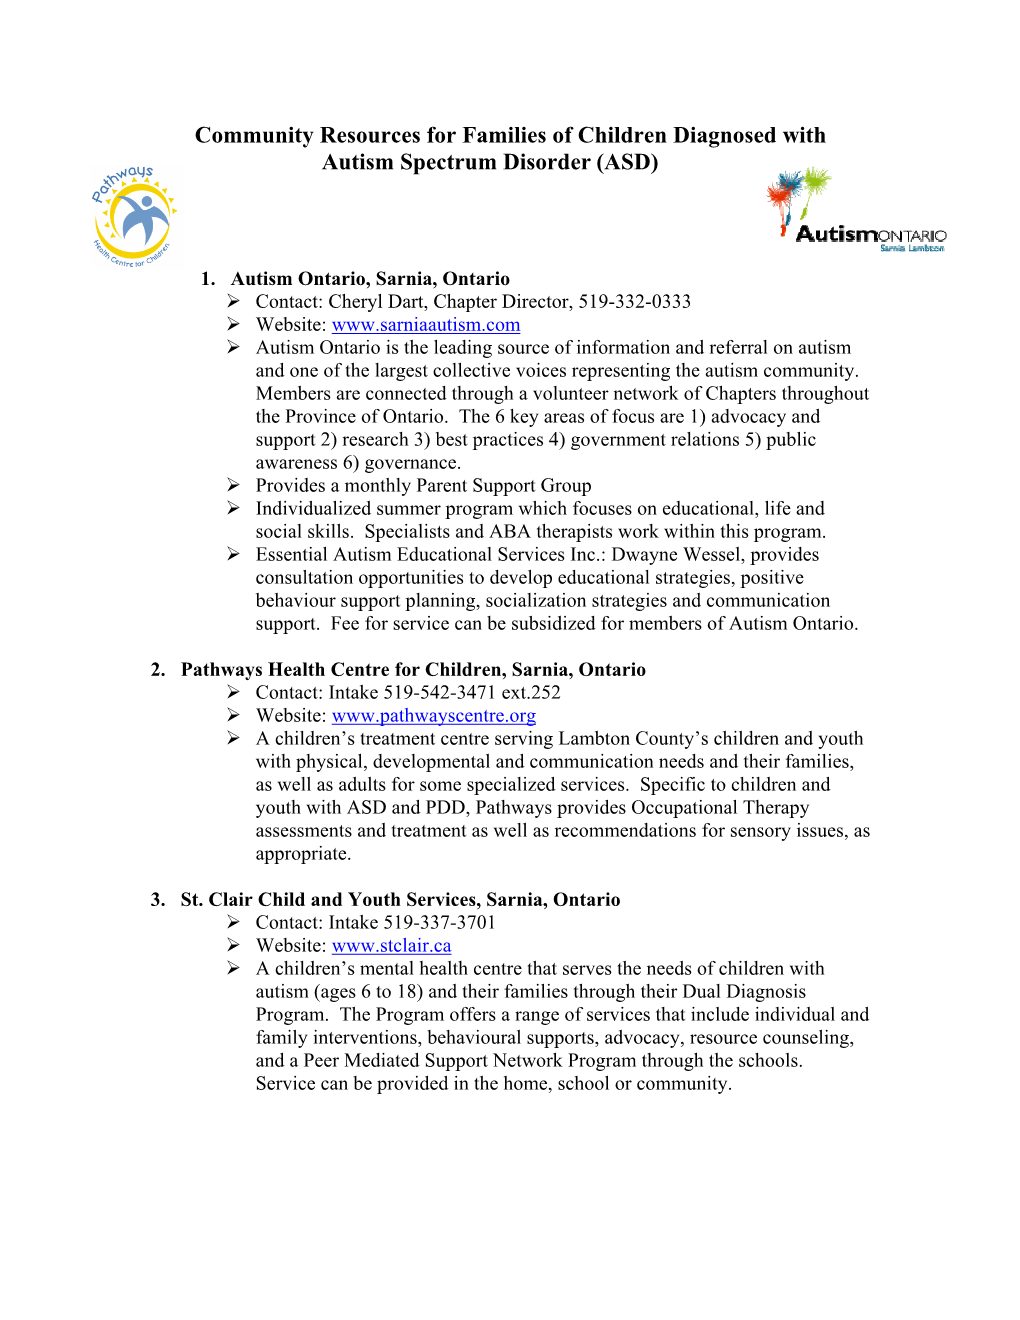 Community Resources for Families of Children Diagnosed with Autism Spectrum Disorder (ASD)